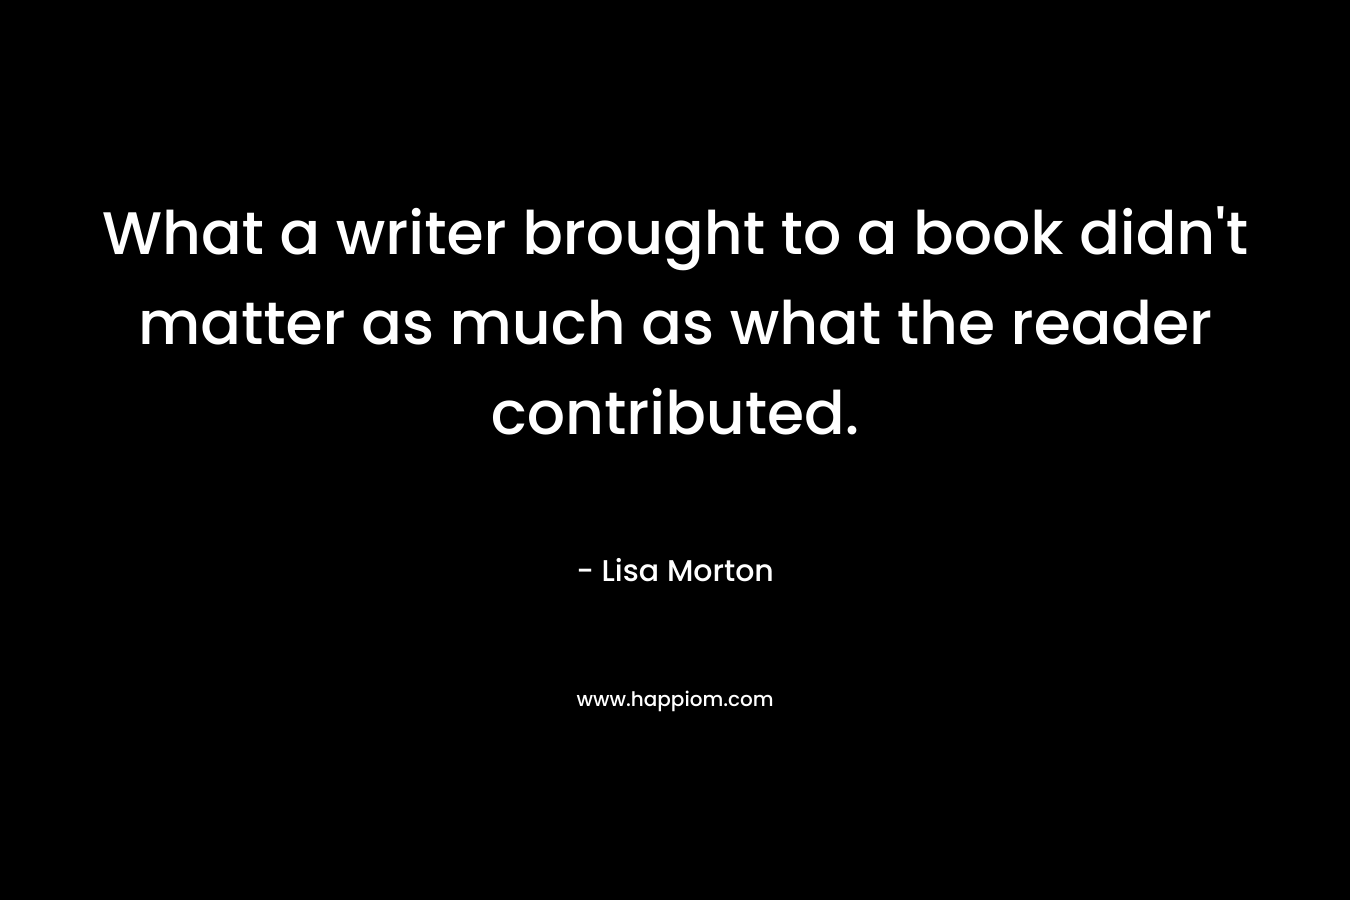 What a writer brought to a book didn’t matter as much as what the reader contributed. – Lisa Morton